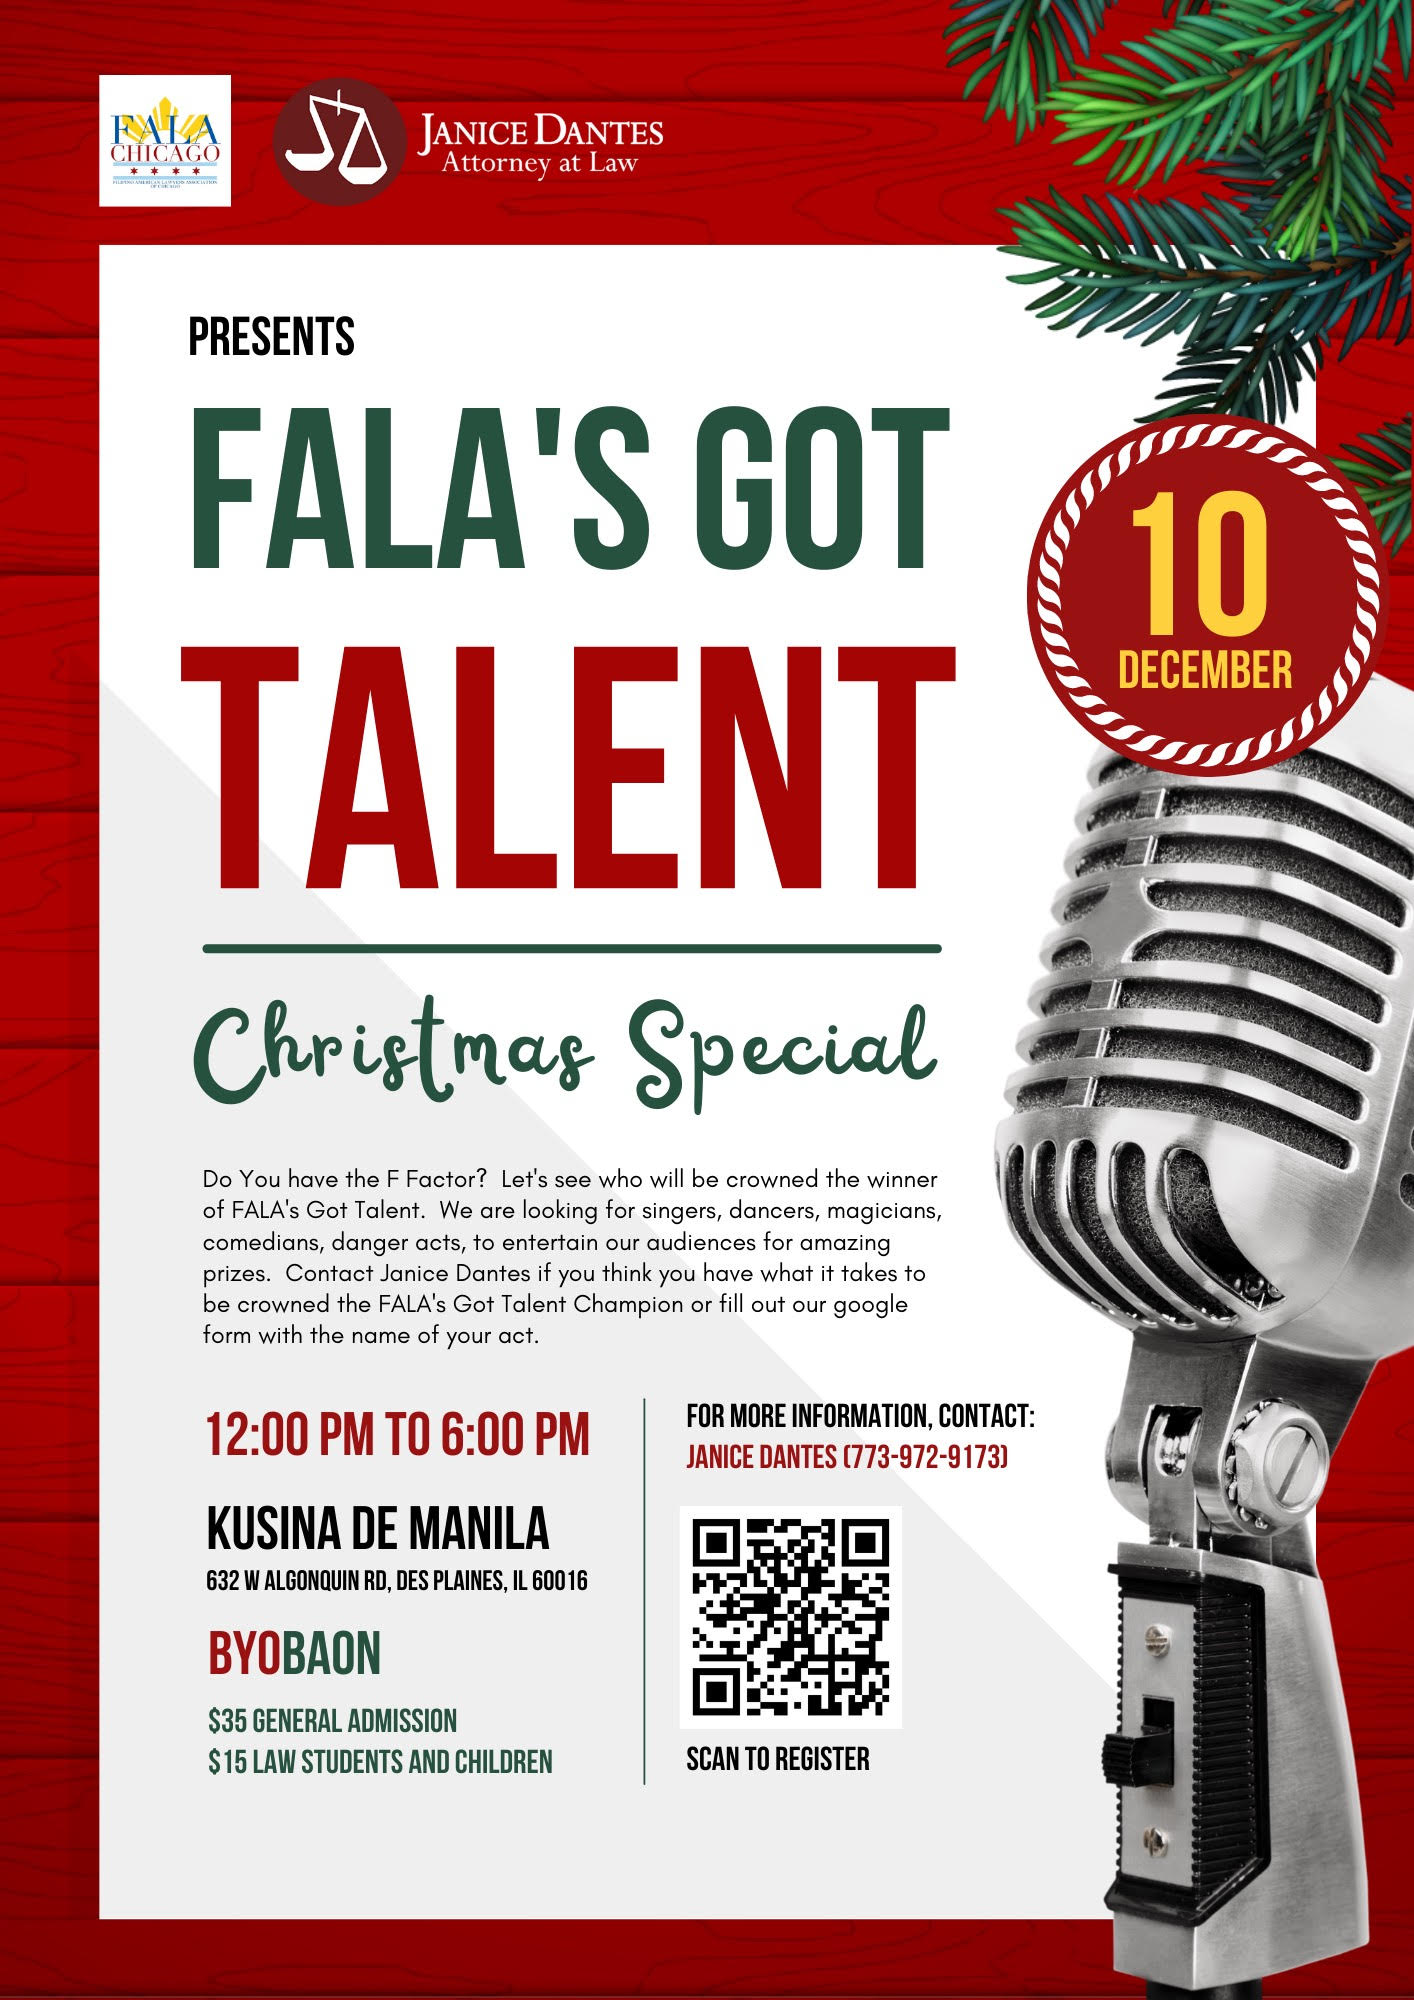 2022 Holiday Party - FALA'S GOT TALENT